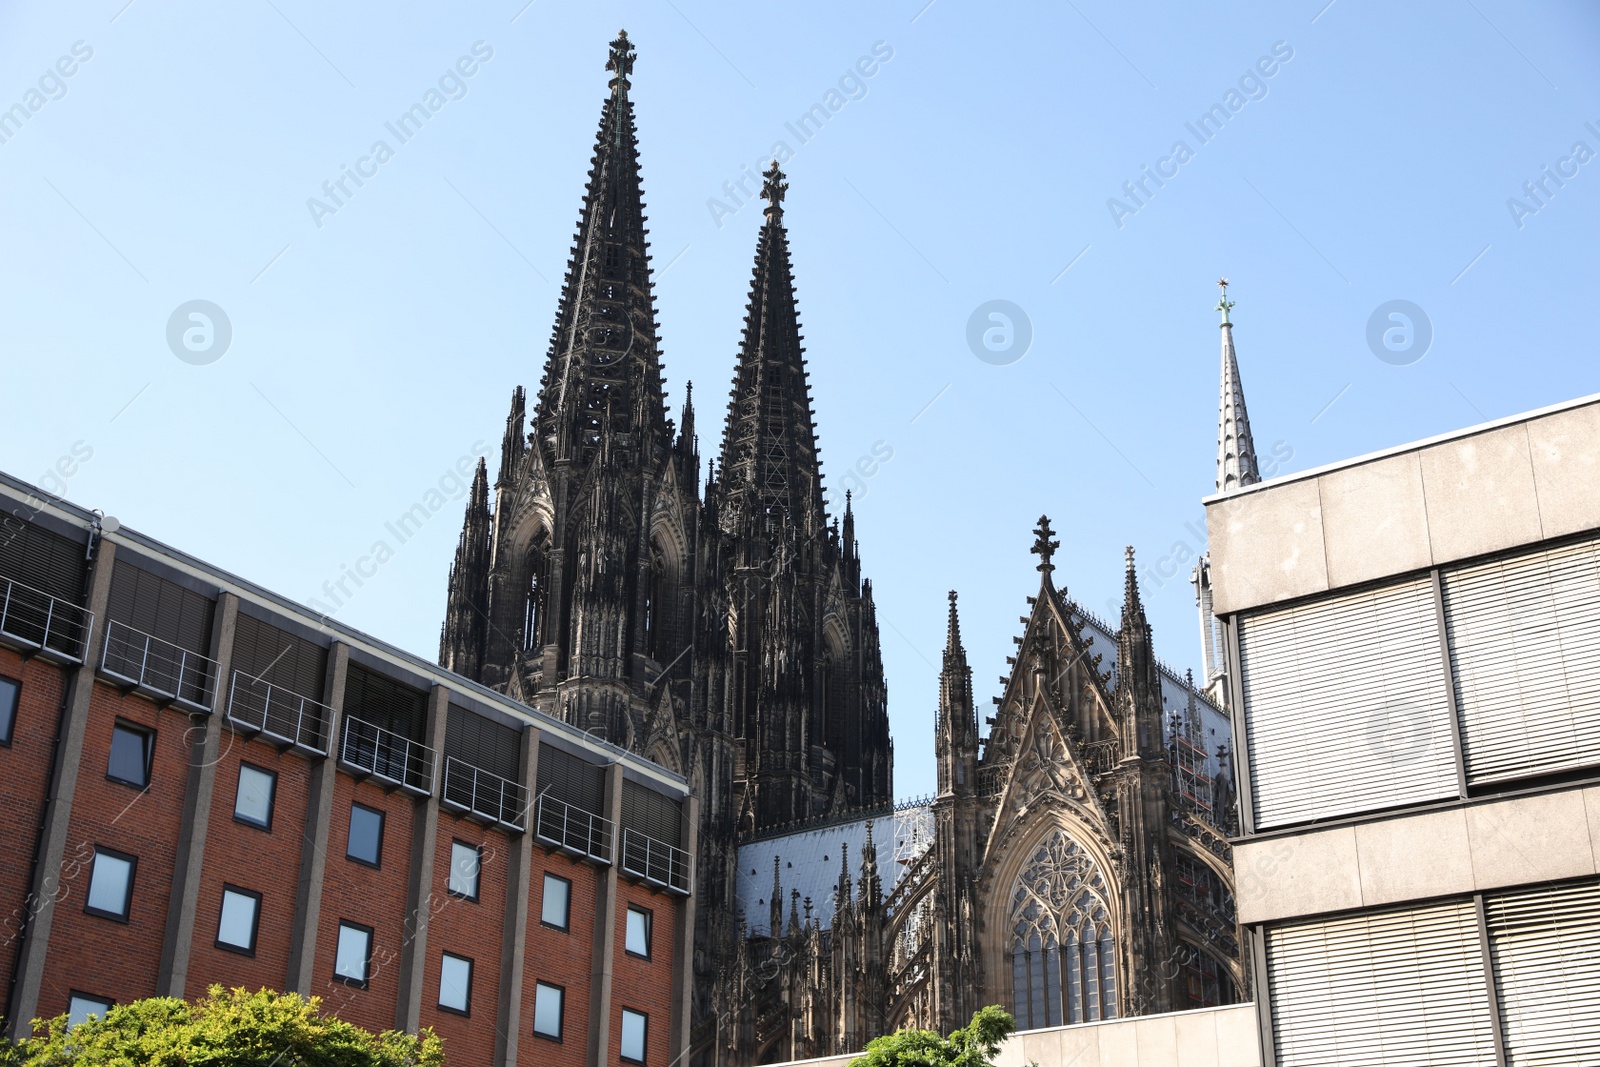 Photo of Cologne, Germany - August 28, 2022: Beautiful view of city street with different architecture